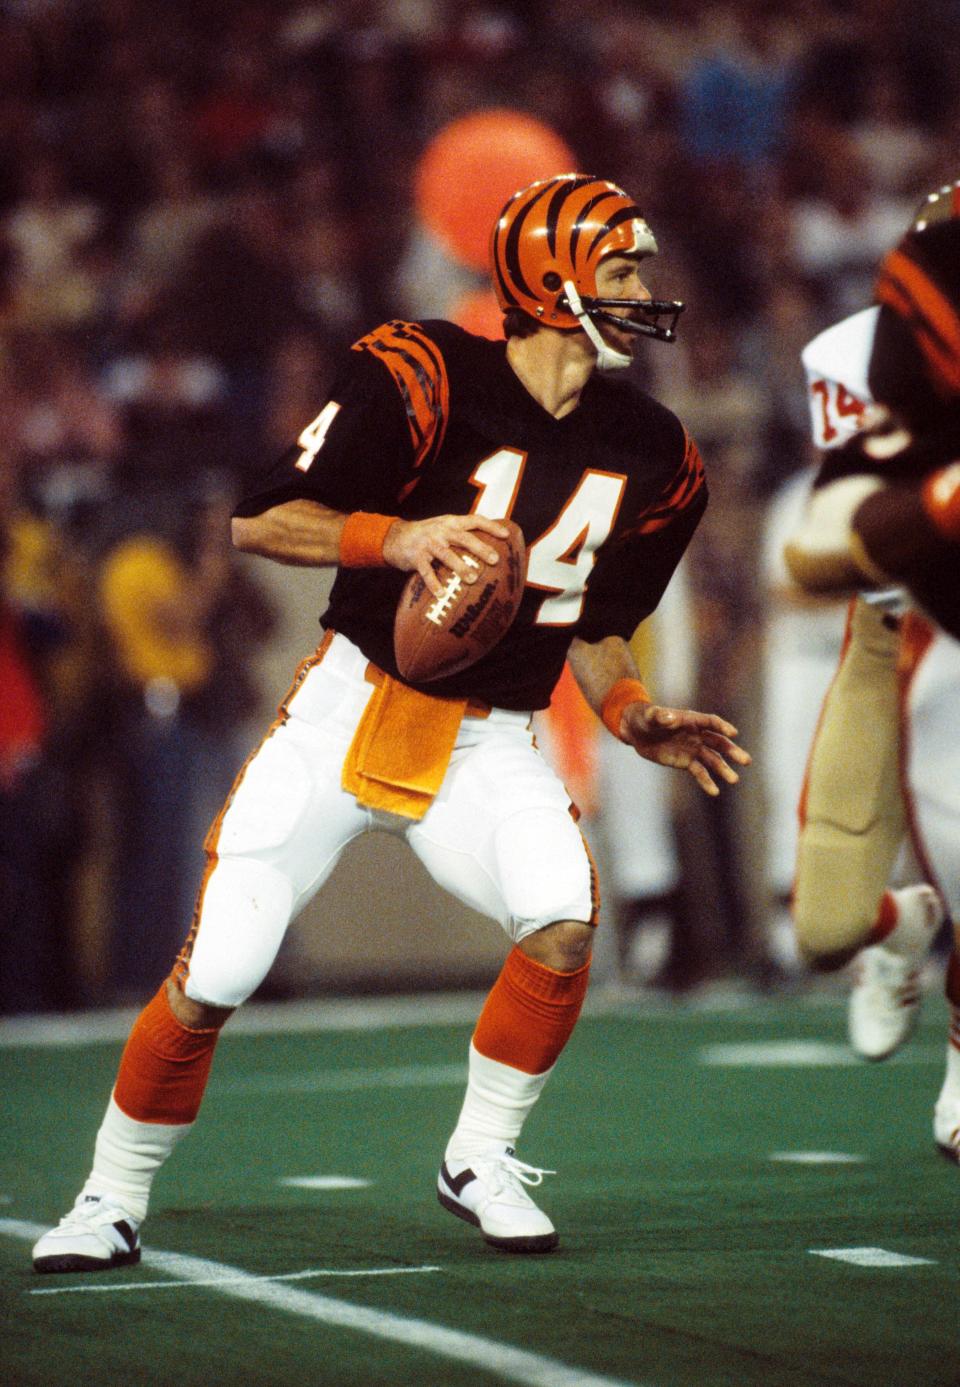 Jan 24, 1982; Pontiac, MI, USA; FILE PHOTO; Cincinnati Bengals quarterback (14) Ken Anderson inaction during Super Bowl XVI against the San Francisco 49ers at the Ponitac Silverdome. The 49ers defeated the Bengals 26-21 giving the 49ers their 1st Super Bowl title. Mandatory Credit: Photo By Malcolm Emmons- USA TODAY Sports © Copyright Malcolm Emmons